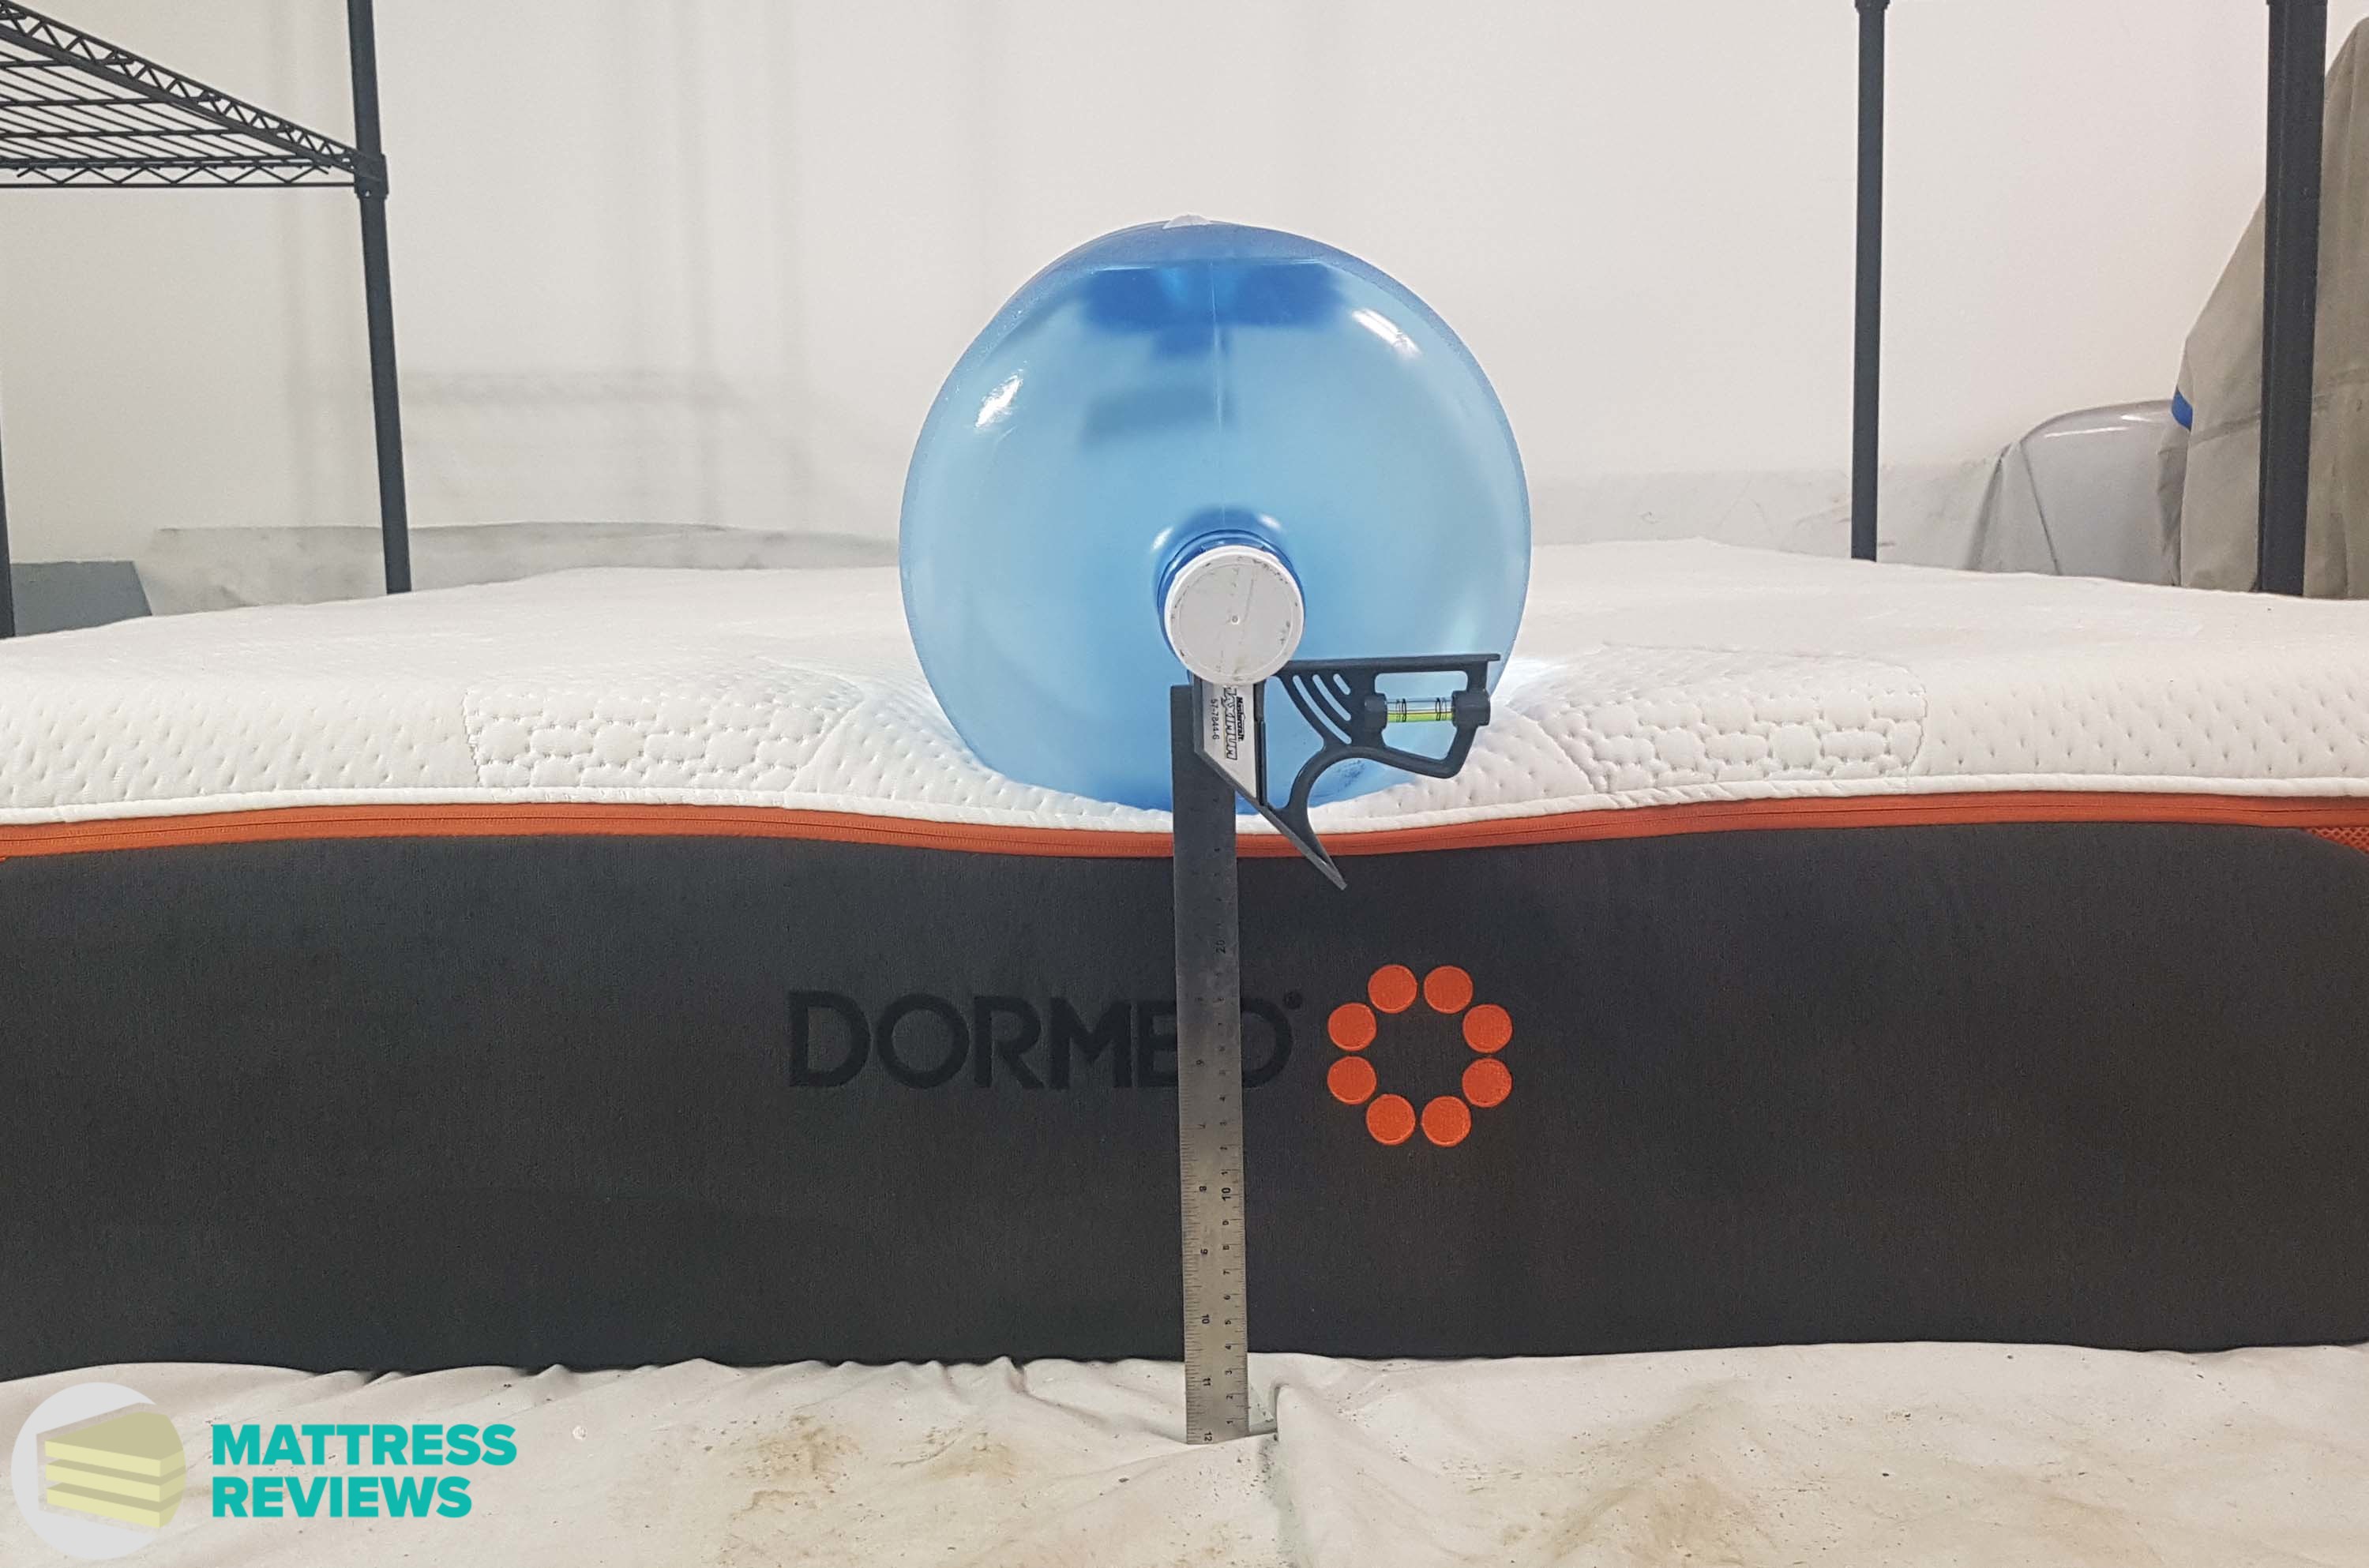 Image of the Dormeo mattress edge support test.